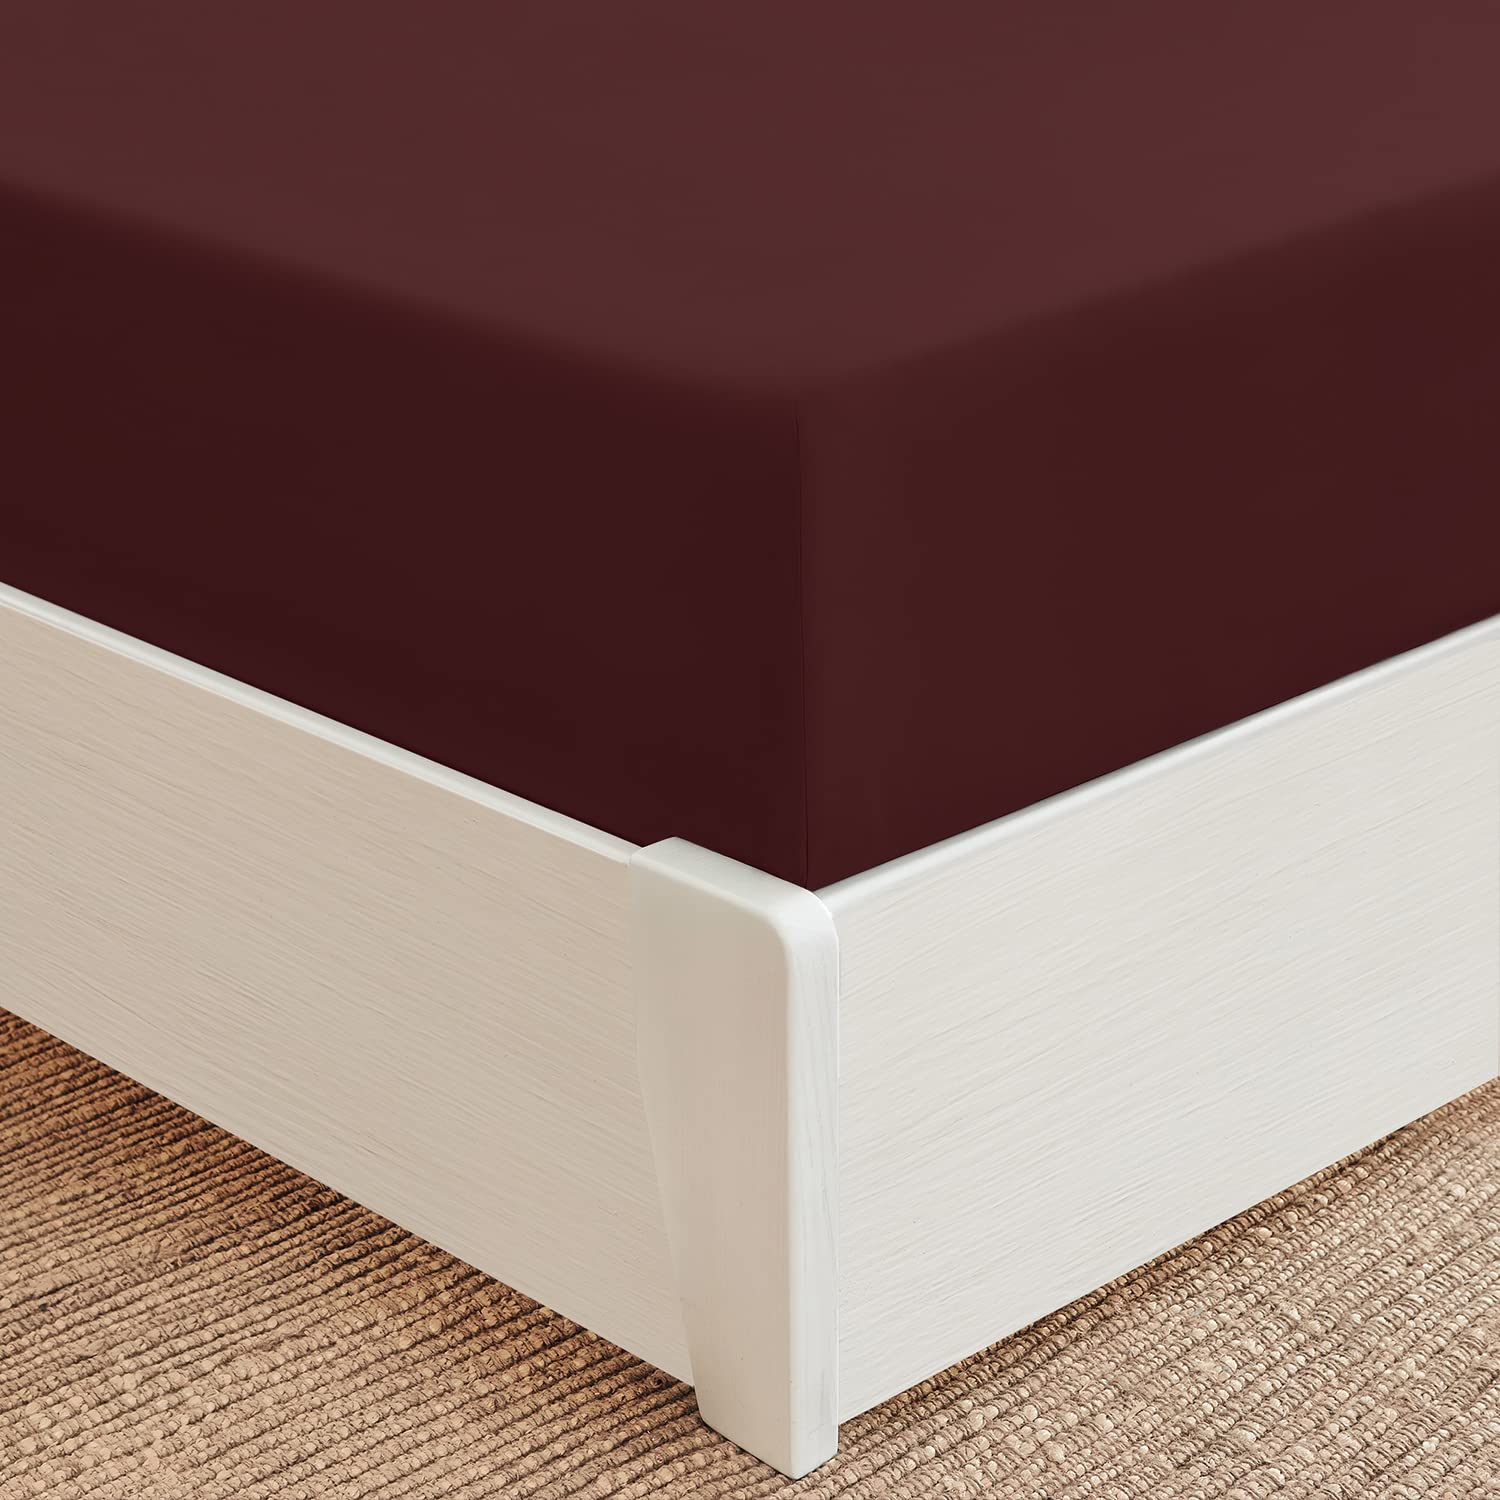 Book Cover Mellanni Twin Fitted Sheet Only - Iconic Collection Bedding Sheets - Soft & Cooling Sheets with up to 16 inch Deep Pocket - All Around Elastic - Wrinkle, Fade, Stain Resistant - 1 PC (Twin, Burgundy) Twin Burgundy